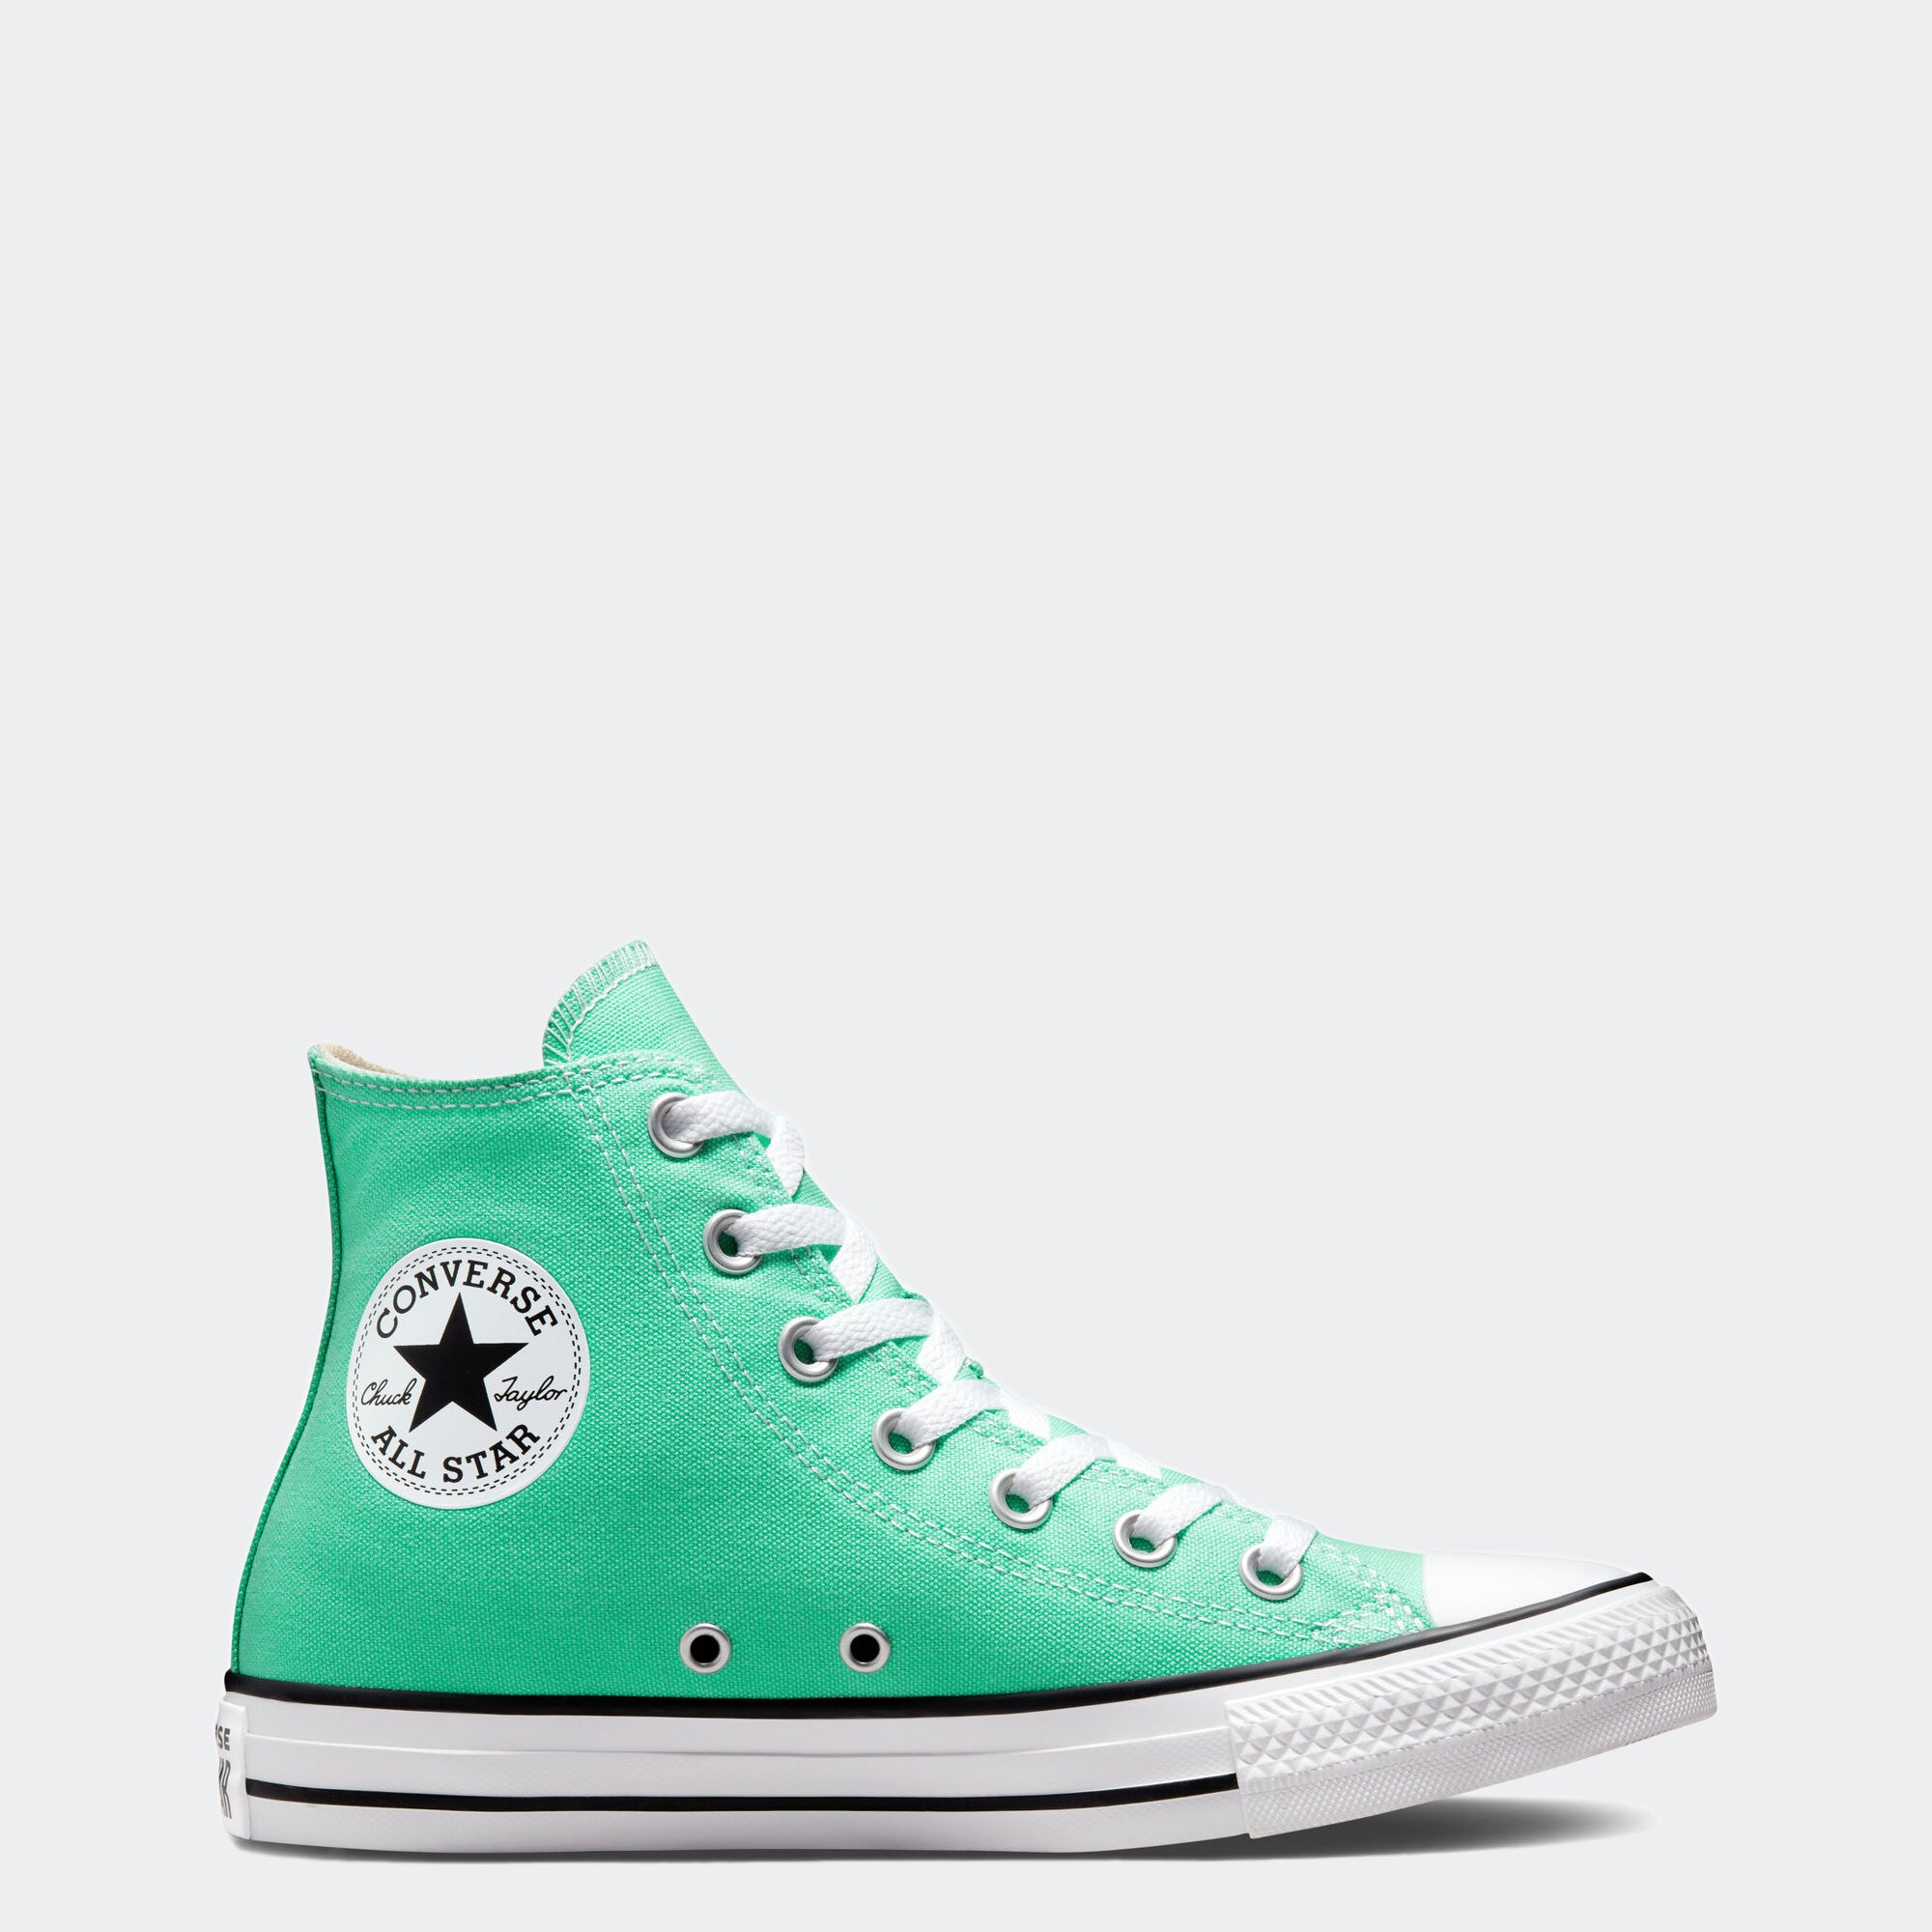 Chuck Taylor All Star Hi Top Cyber Teal | Chicago City Sports